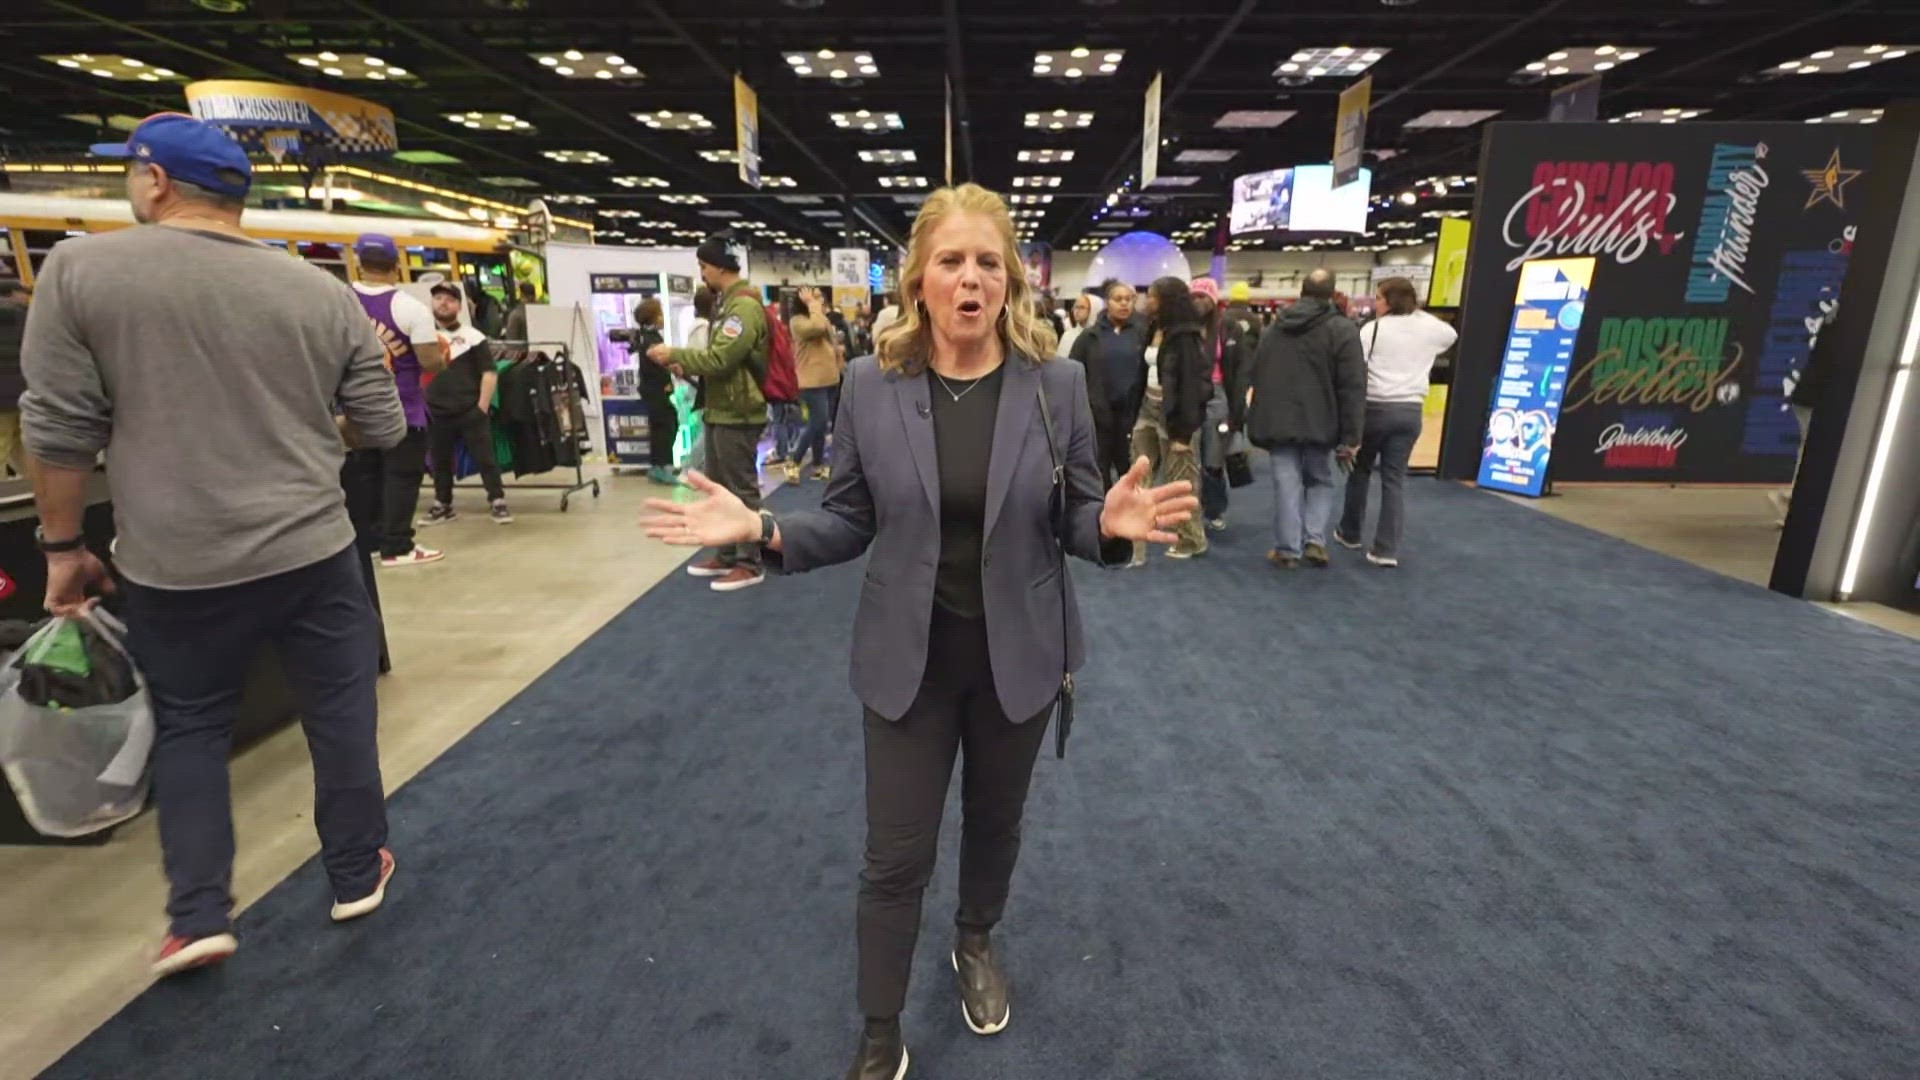 Pacers legend Reggie Miller met with the media to talk All-Star weekend and Anne Marie Tiernon shows us around the festivities at the Convention Center.